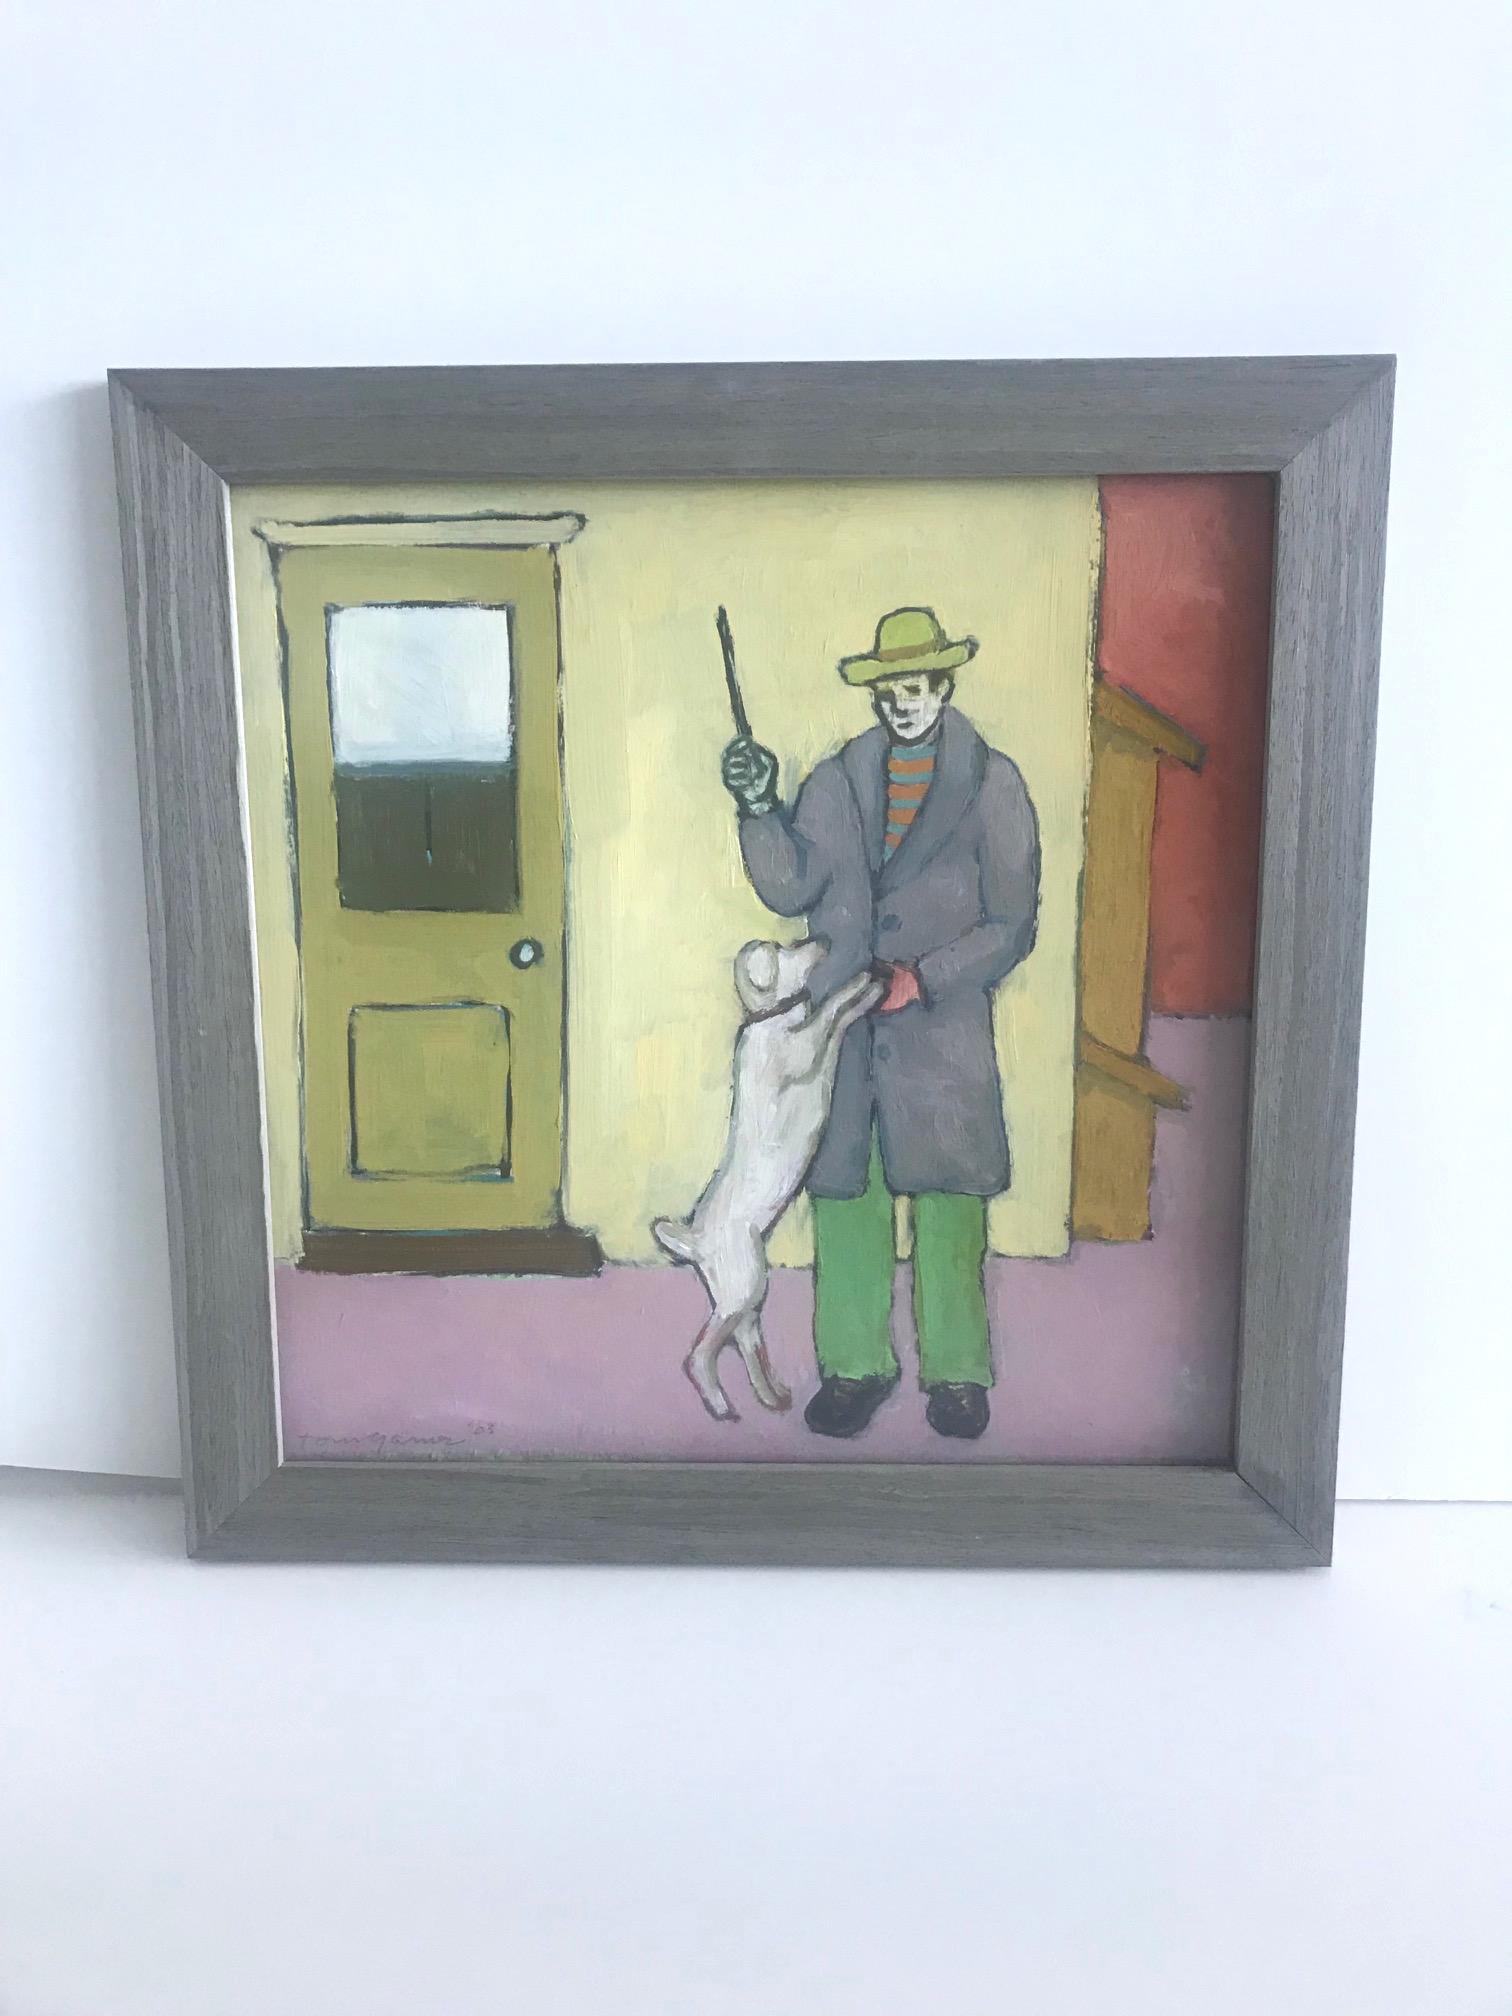 Outstanding figural painting featuring a man and his dog by contemporary artist Tom Gaines. Oil on canvas painting in custom grey cerused wood frame fitted with museum quality glass inset. Gaines is a graduate of The University of Oregon and The